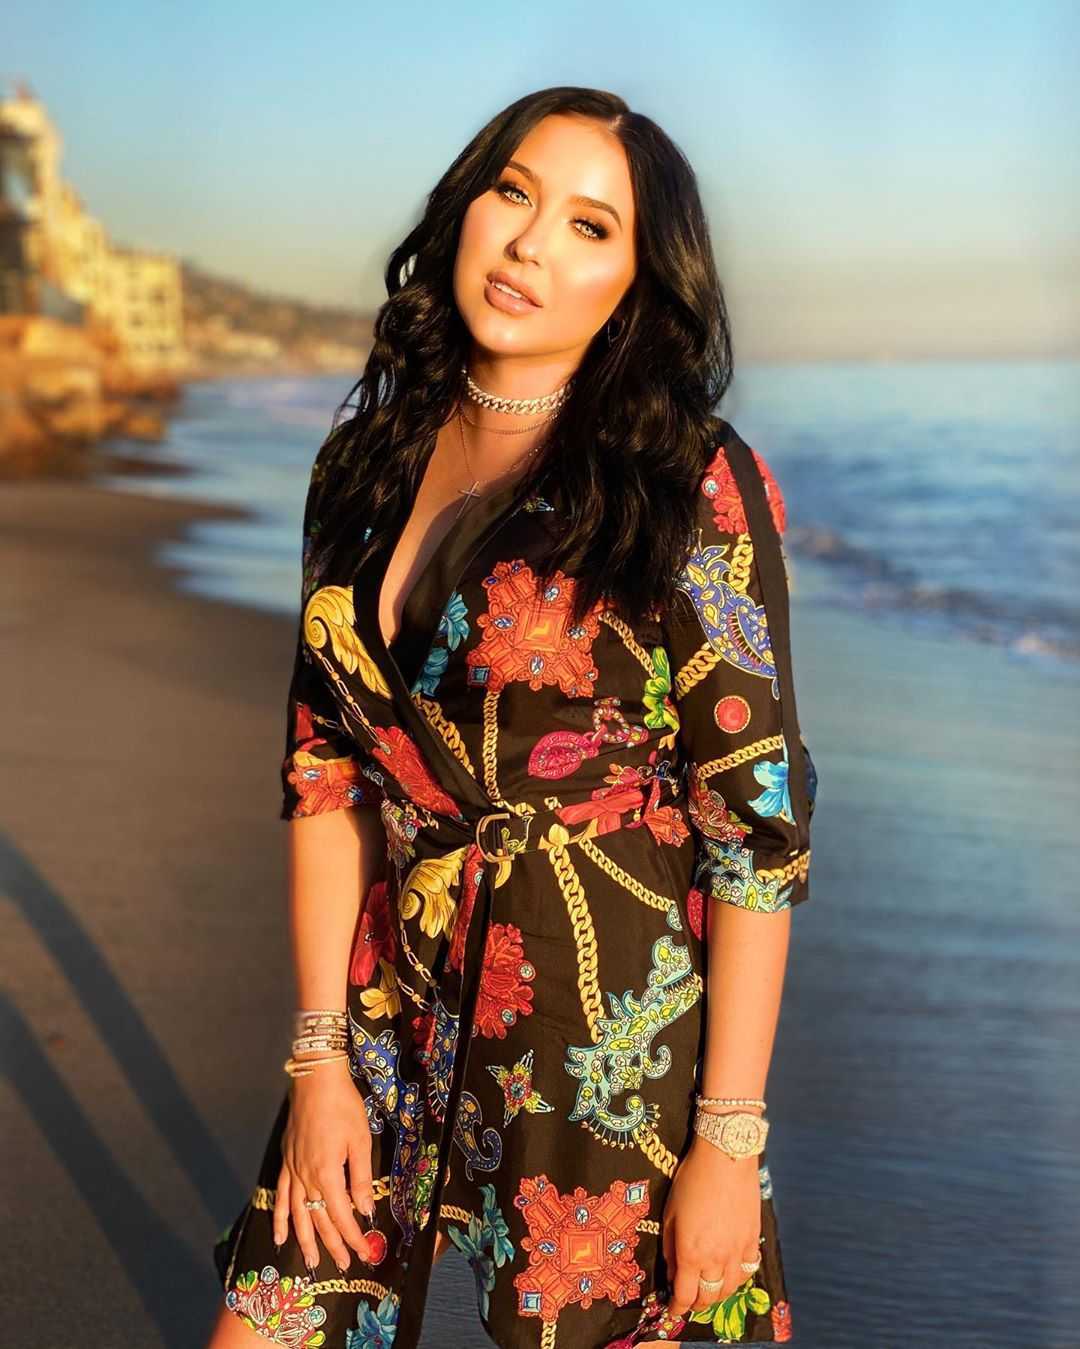 51 Hottest Jaclyn Hill Big Butt Pictures That Are Basically Flawless 37